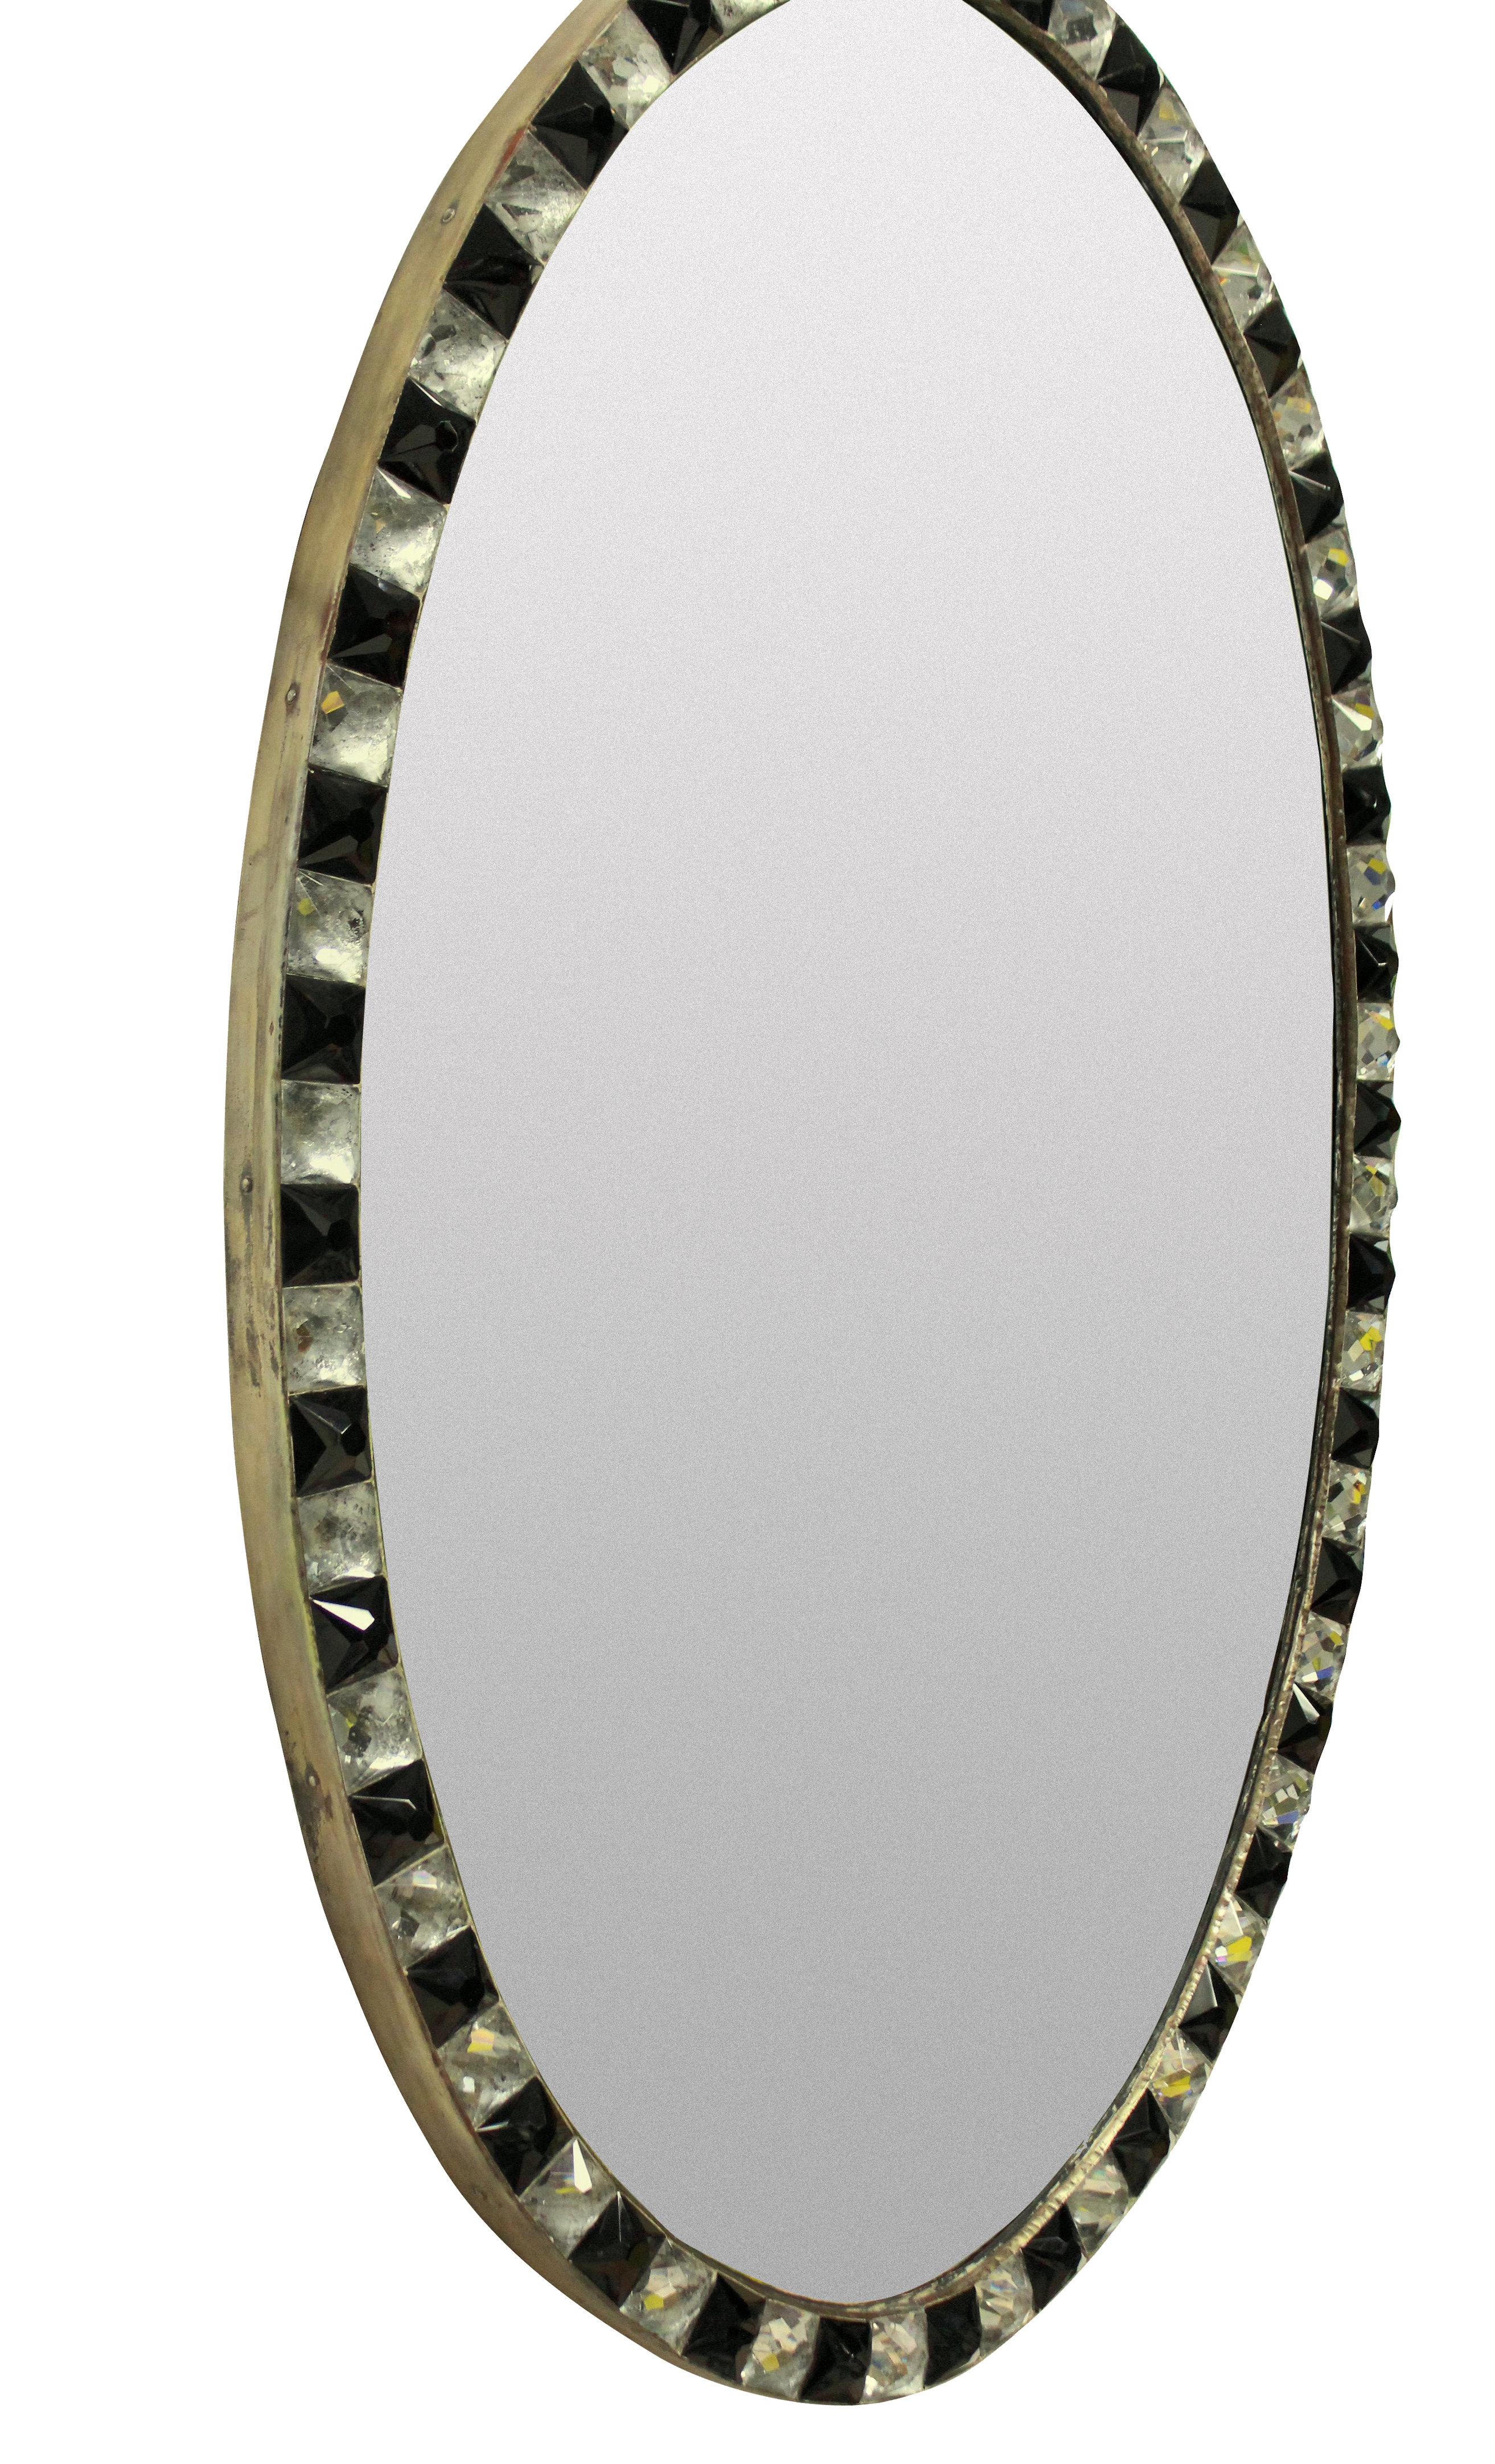 An Irish mirror in the George III style, of good quality with a faux mercury glass mirror plate pinned into a patinated copper frame, bordered with rock crystal and black glass faceted studs in the traditional 18th century manner. Of good weight and